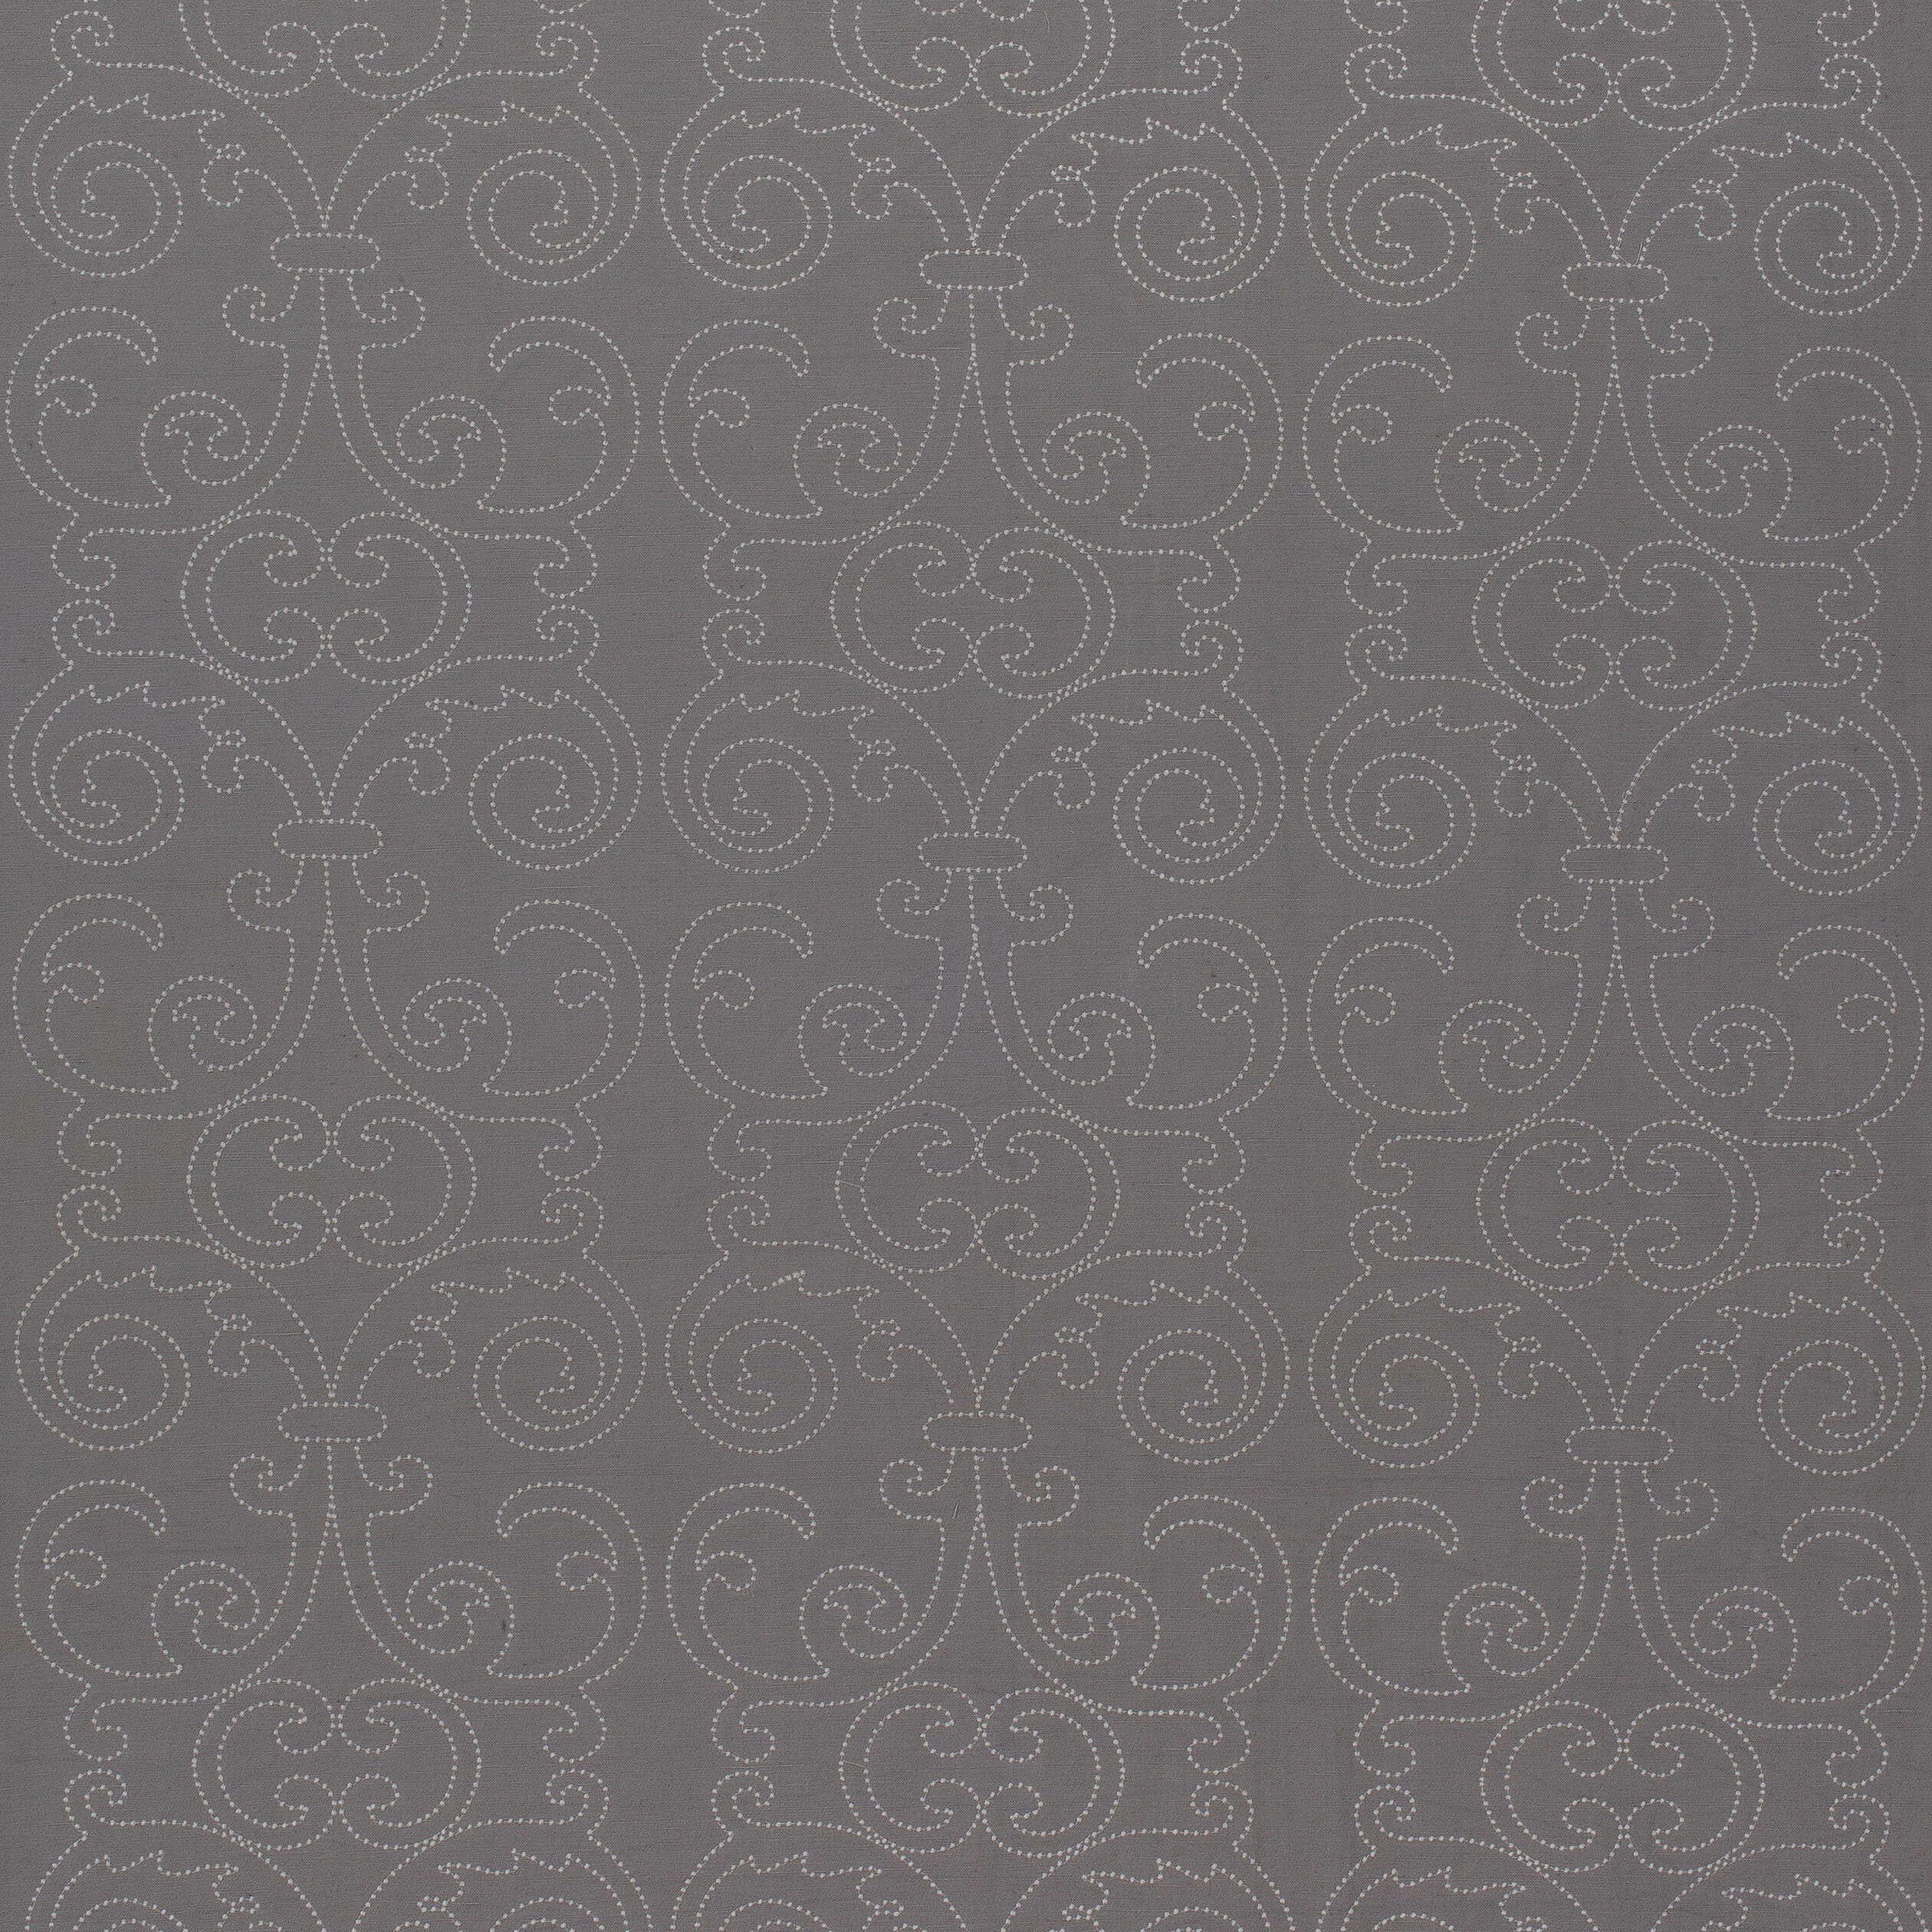 Barcelona Embroidery fabric in grey color - pattern number AW9124 - by Anna French in the Natural Glimmer collection